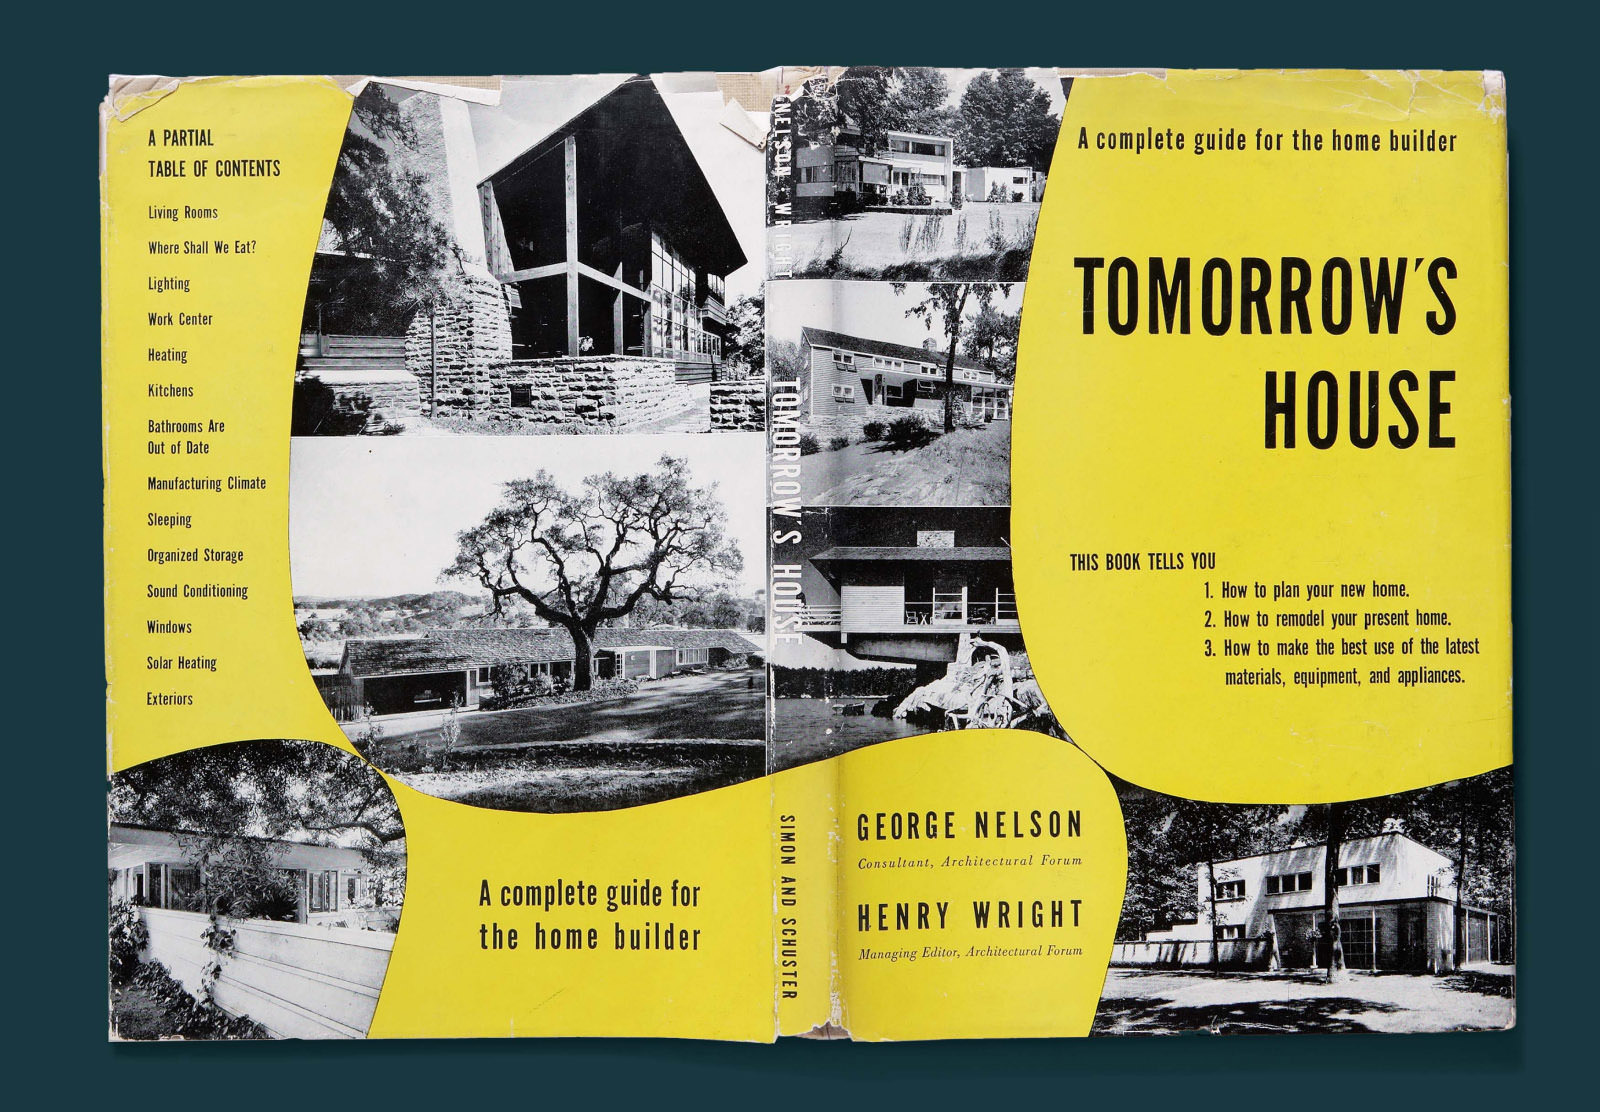 Front and back book covers of Tomorrow's House with the title, author and table on contents in black text positioned within irregular, yellow background featuring black and white photographs of modernist houses.